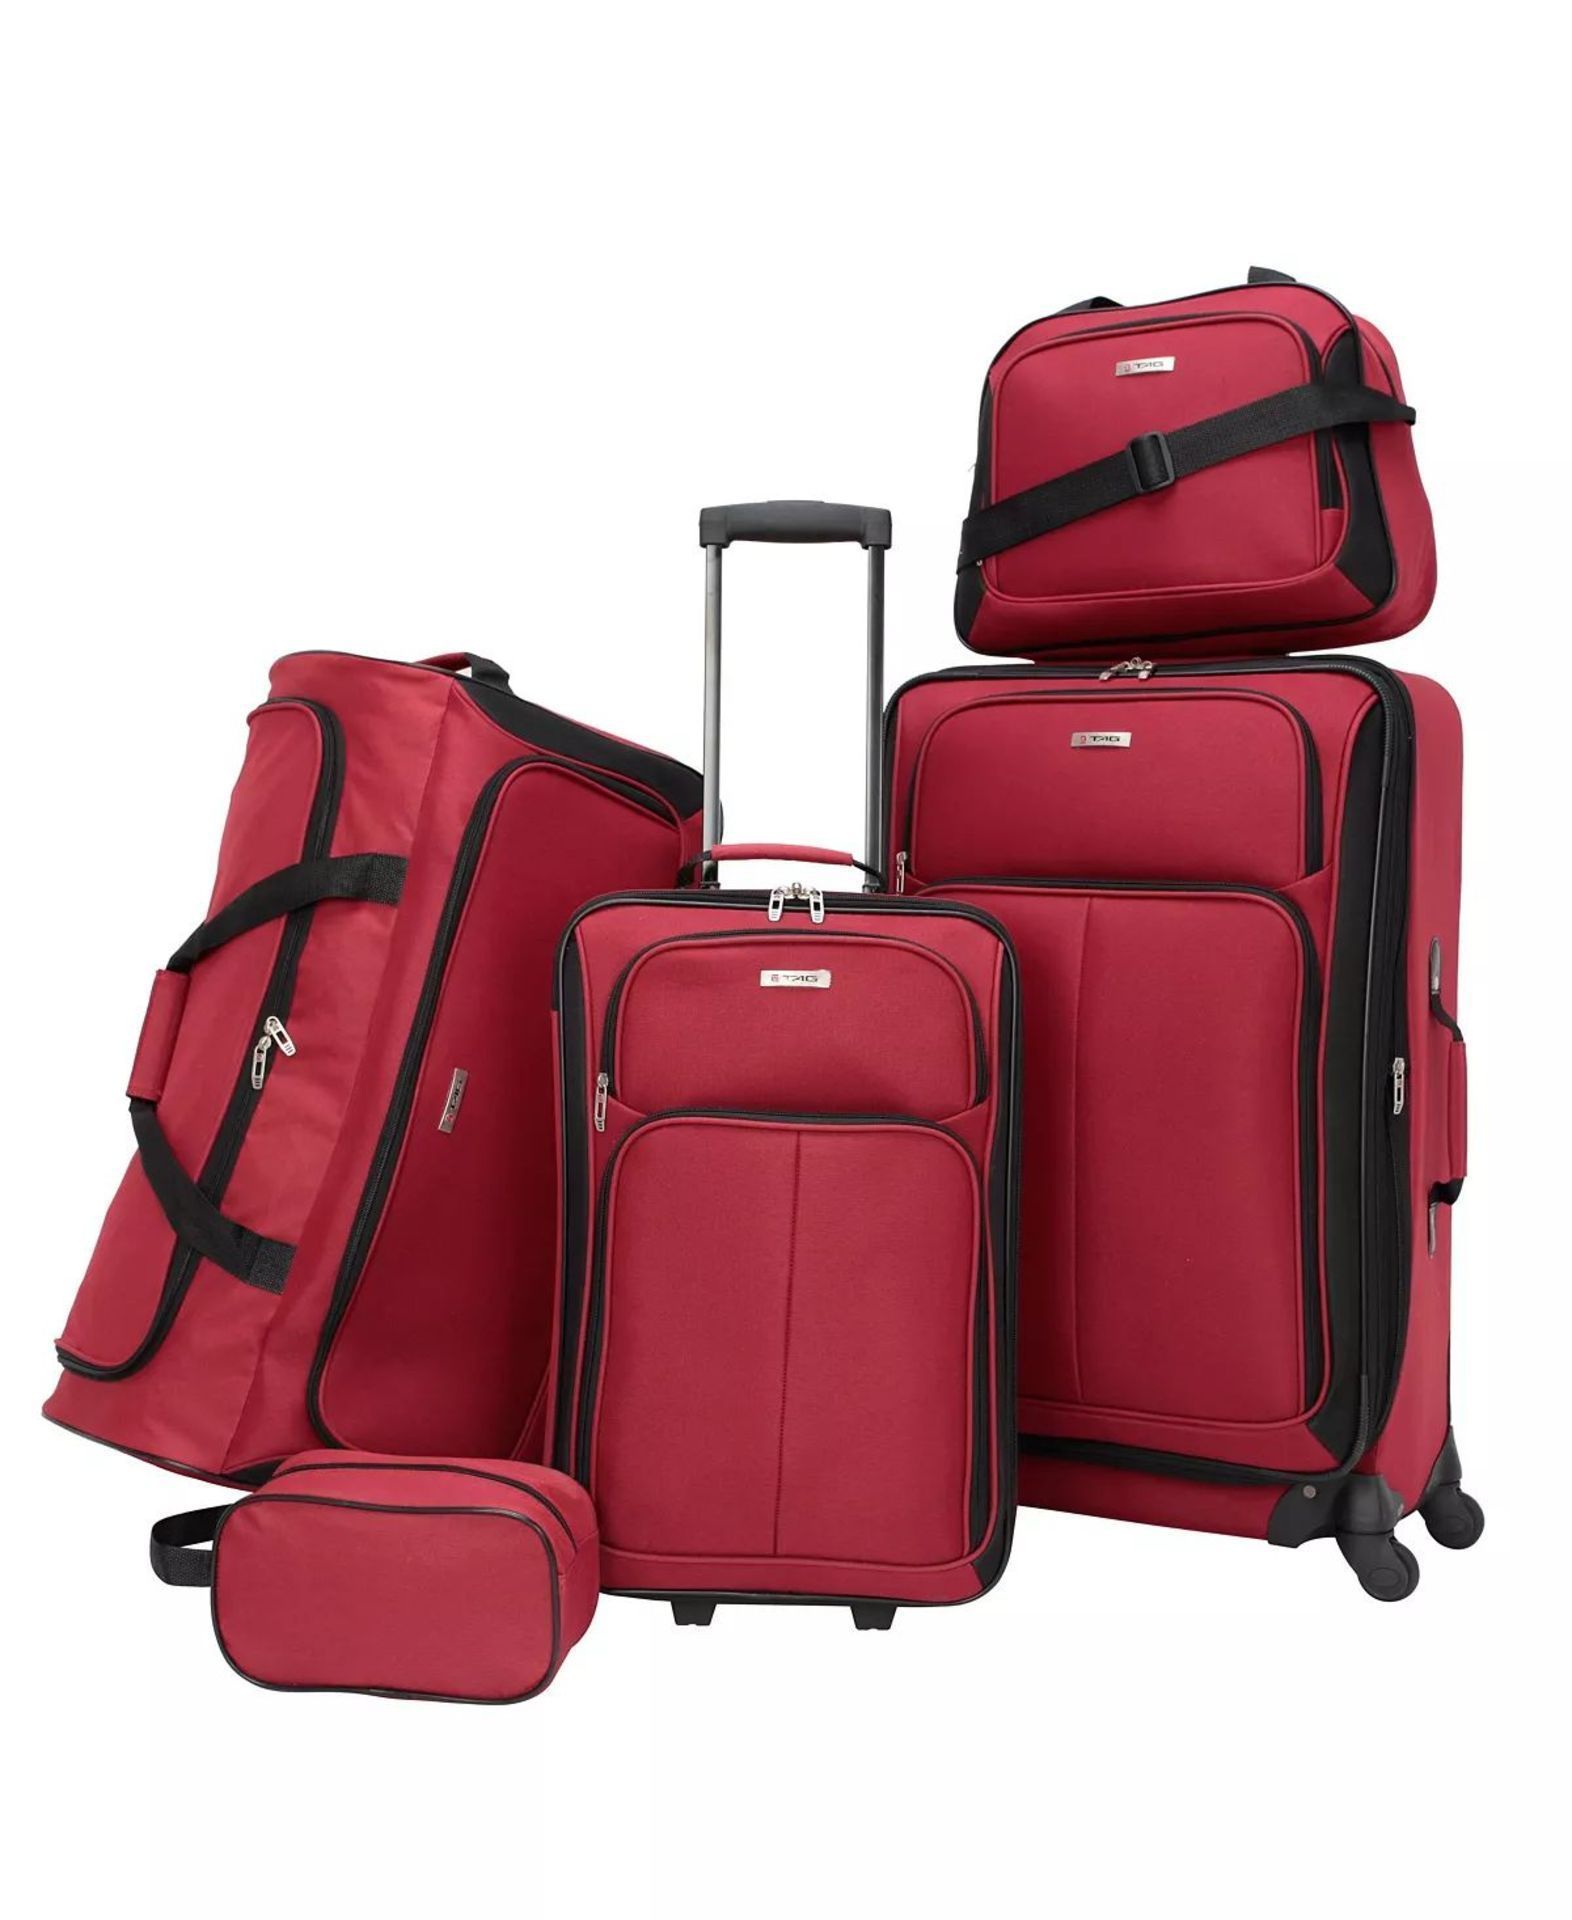 3 X NEW SETS OF TAG Ridgefield RED 5 Piece Softside Luggage Sets. RRP $300 per set, giving this